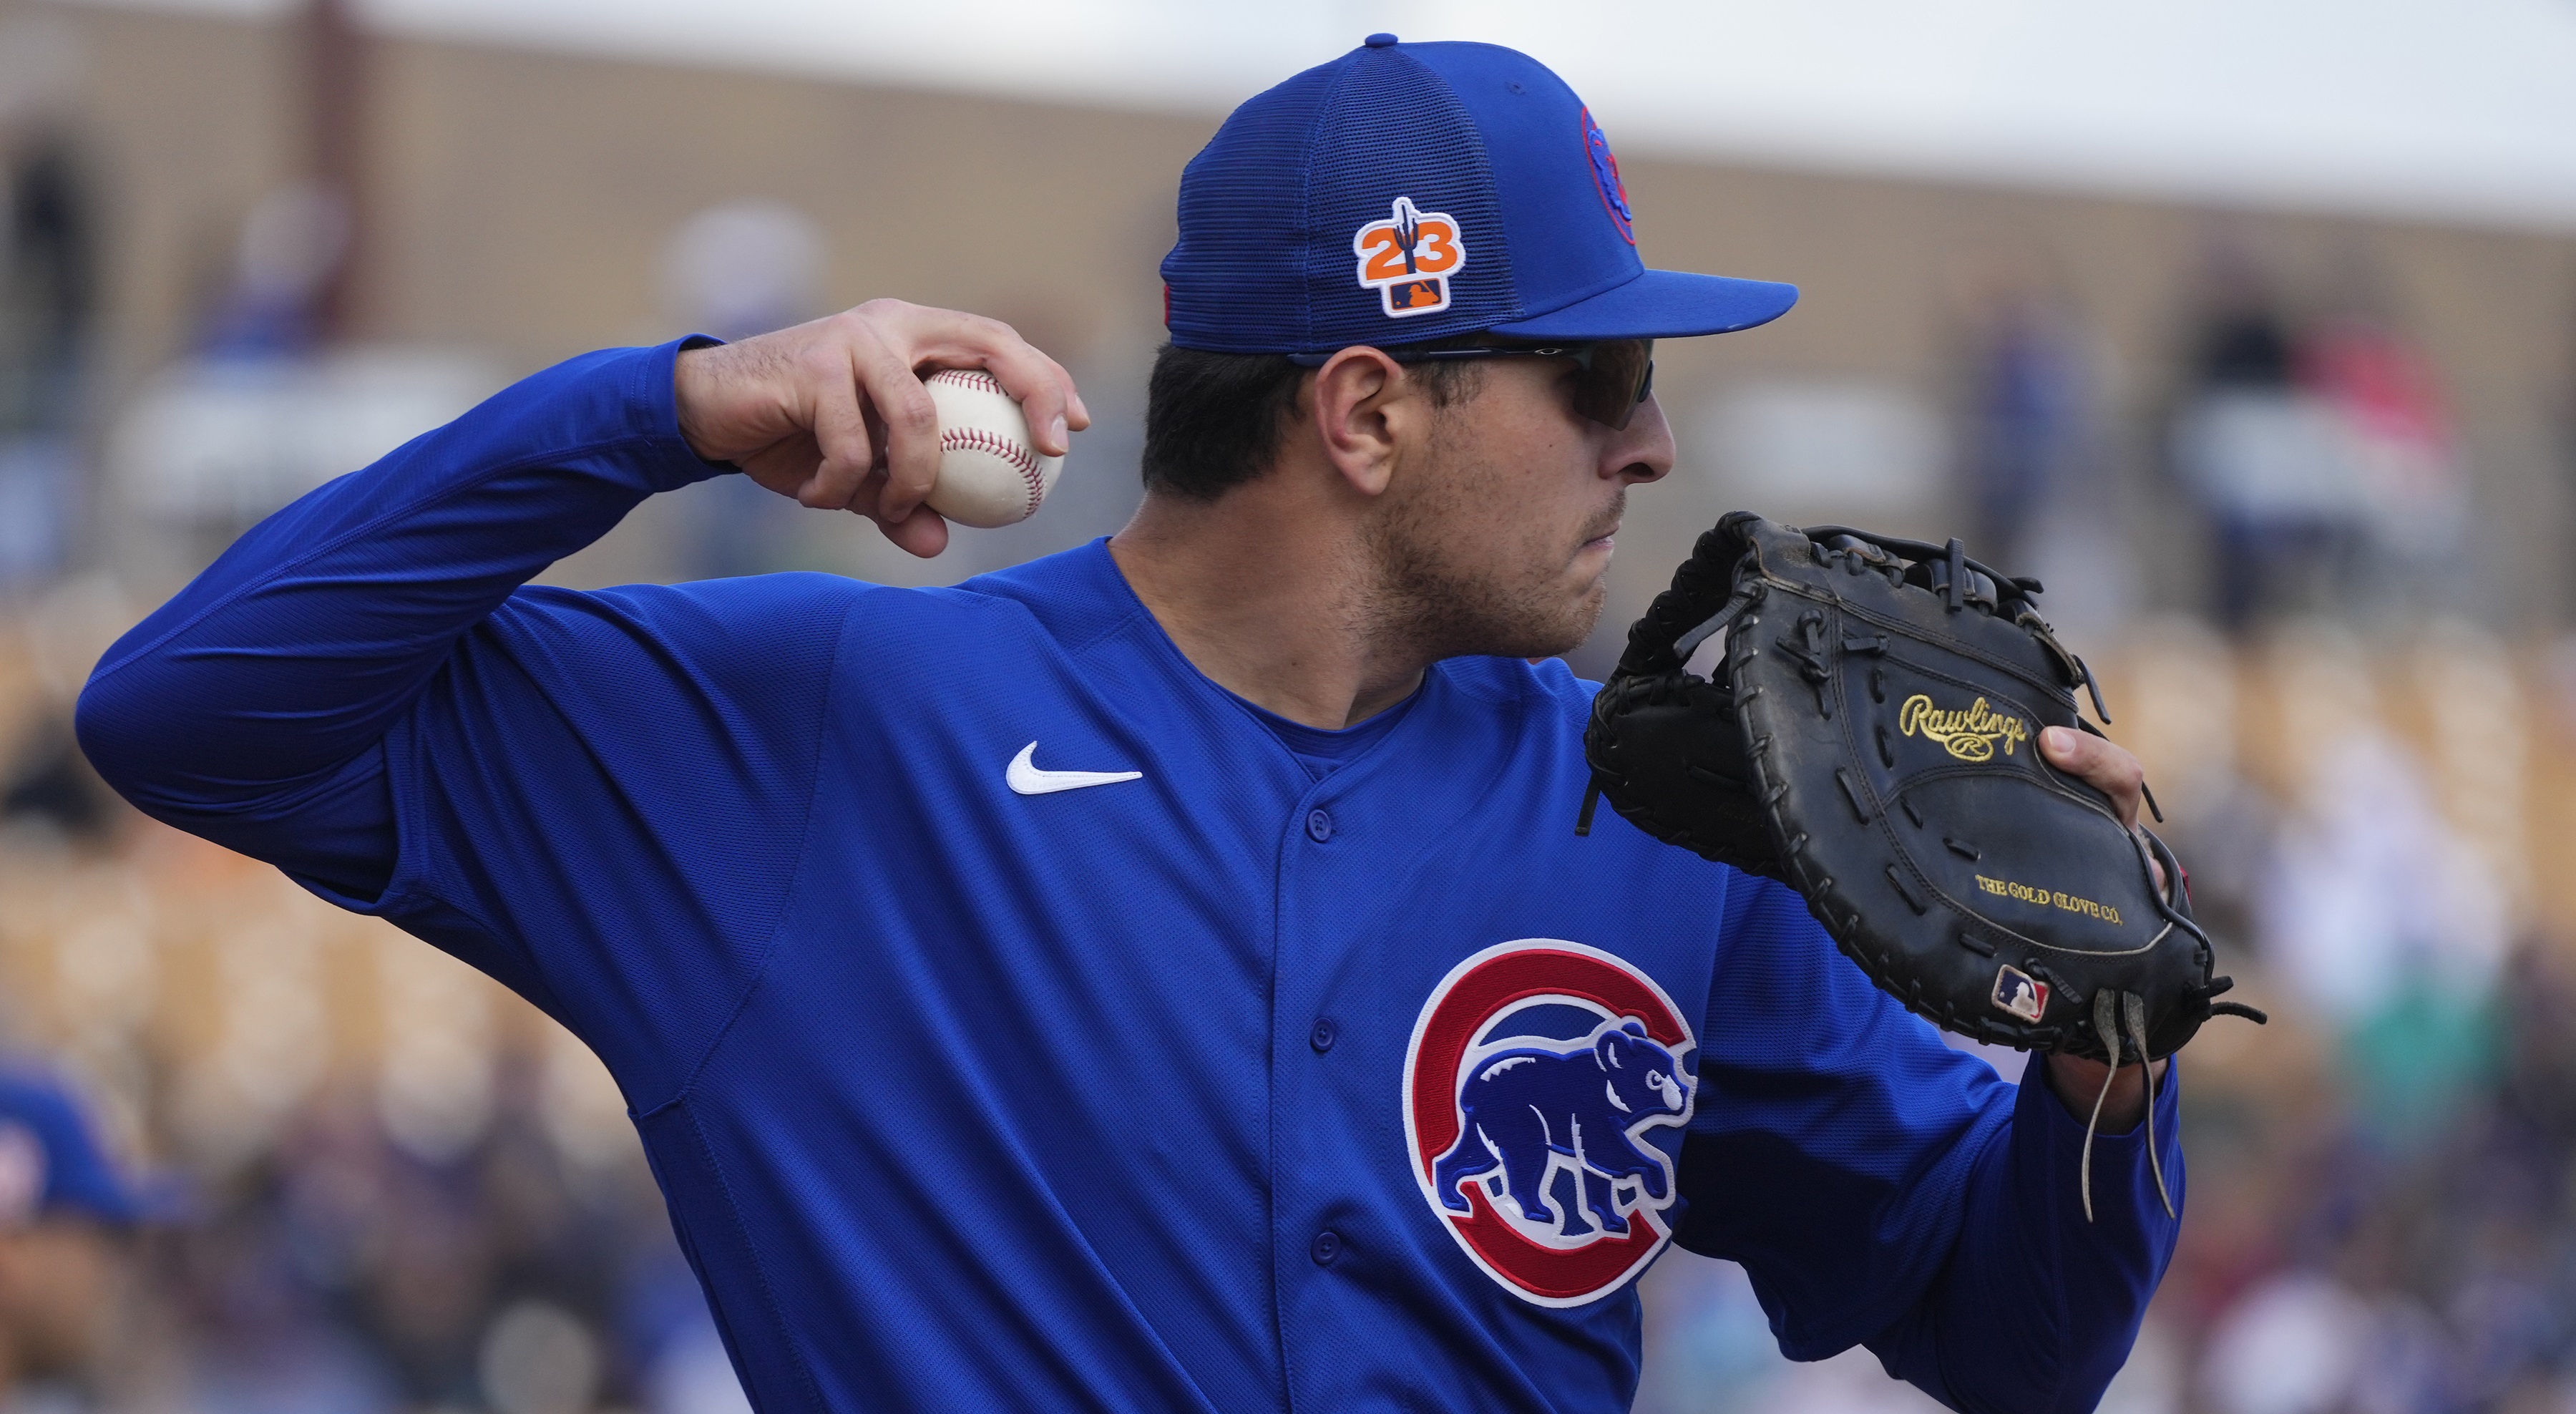 South Bend Cubs on X: A closer look at the home jersey and